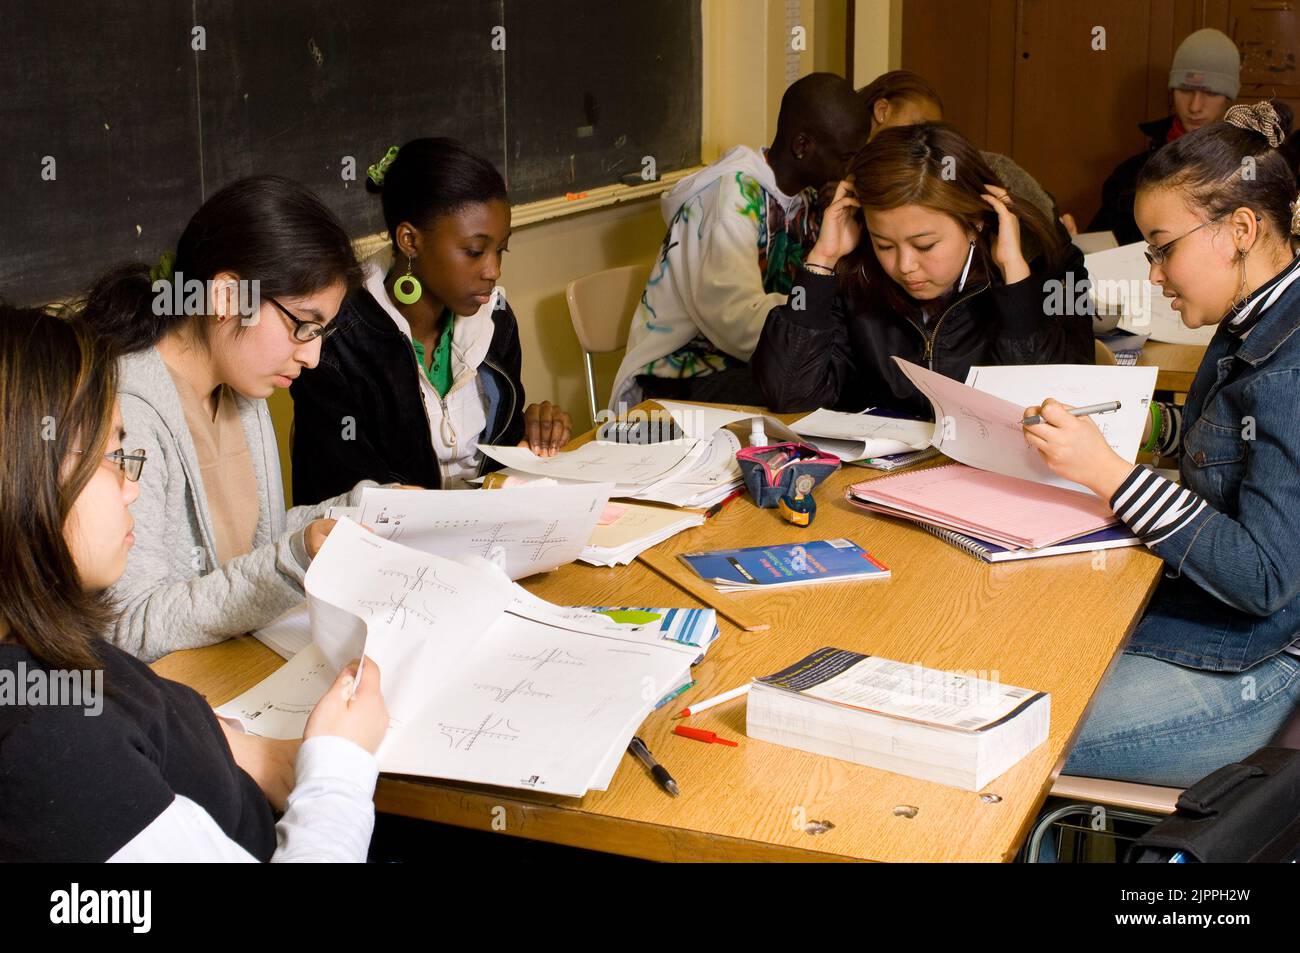 Education HIgh School classroom mathematics or science female students looking at charts or graphs on papers in front of them during class Stock Photo